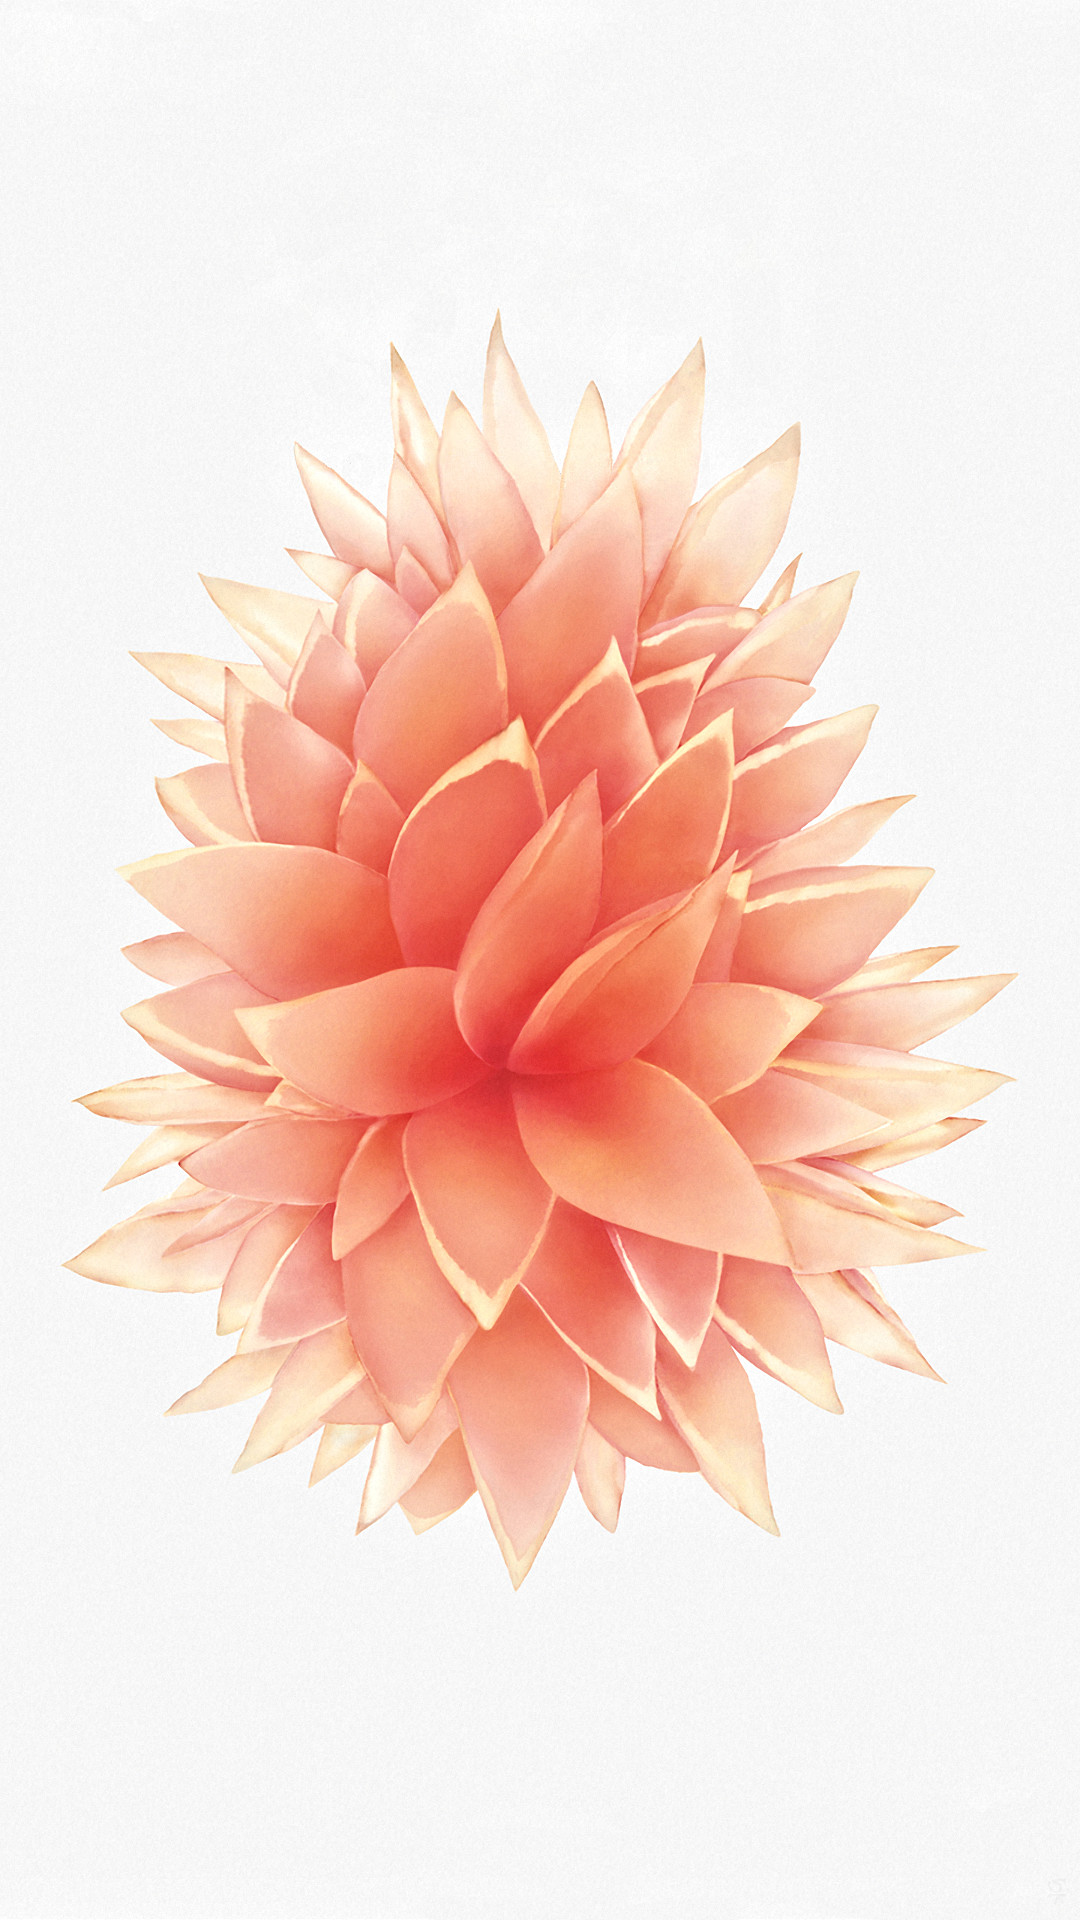 50 Best Rose Gold Wallpapers For iPhone Free Download